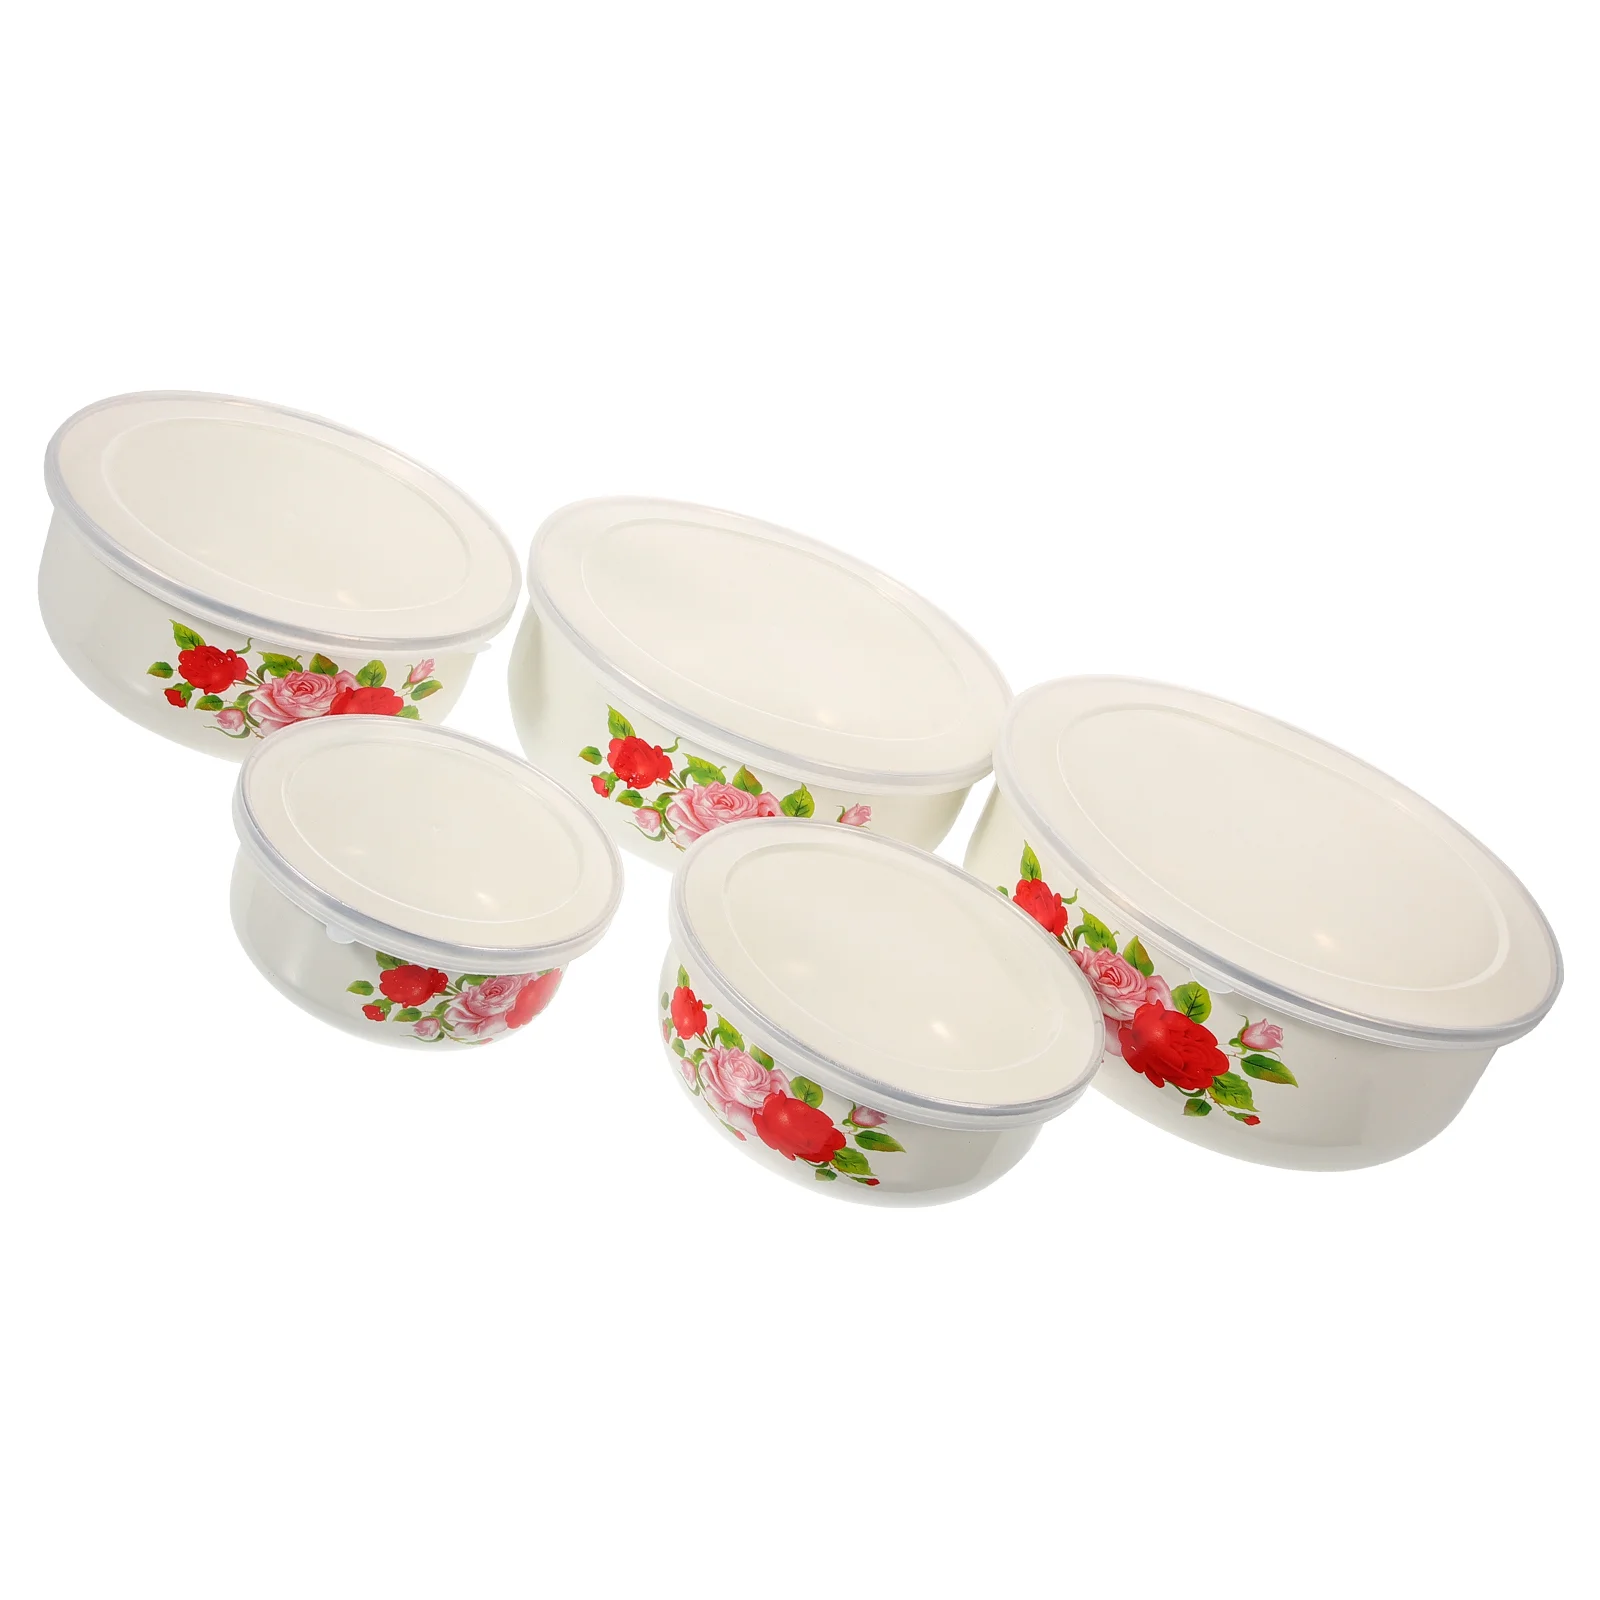 

5 Pcs Enamel Covered Bowl Food Deepen Soup Baby Container Enamelware Containers Lids Metal Mixing Bowls Serving